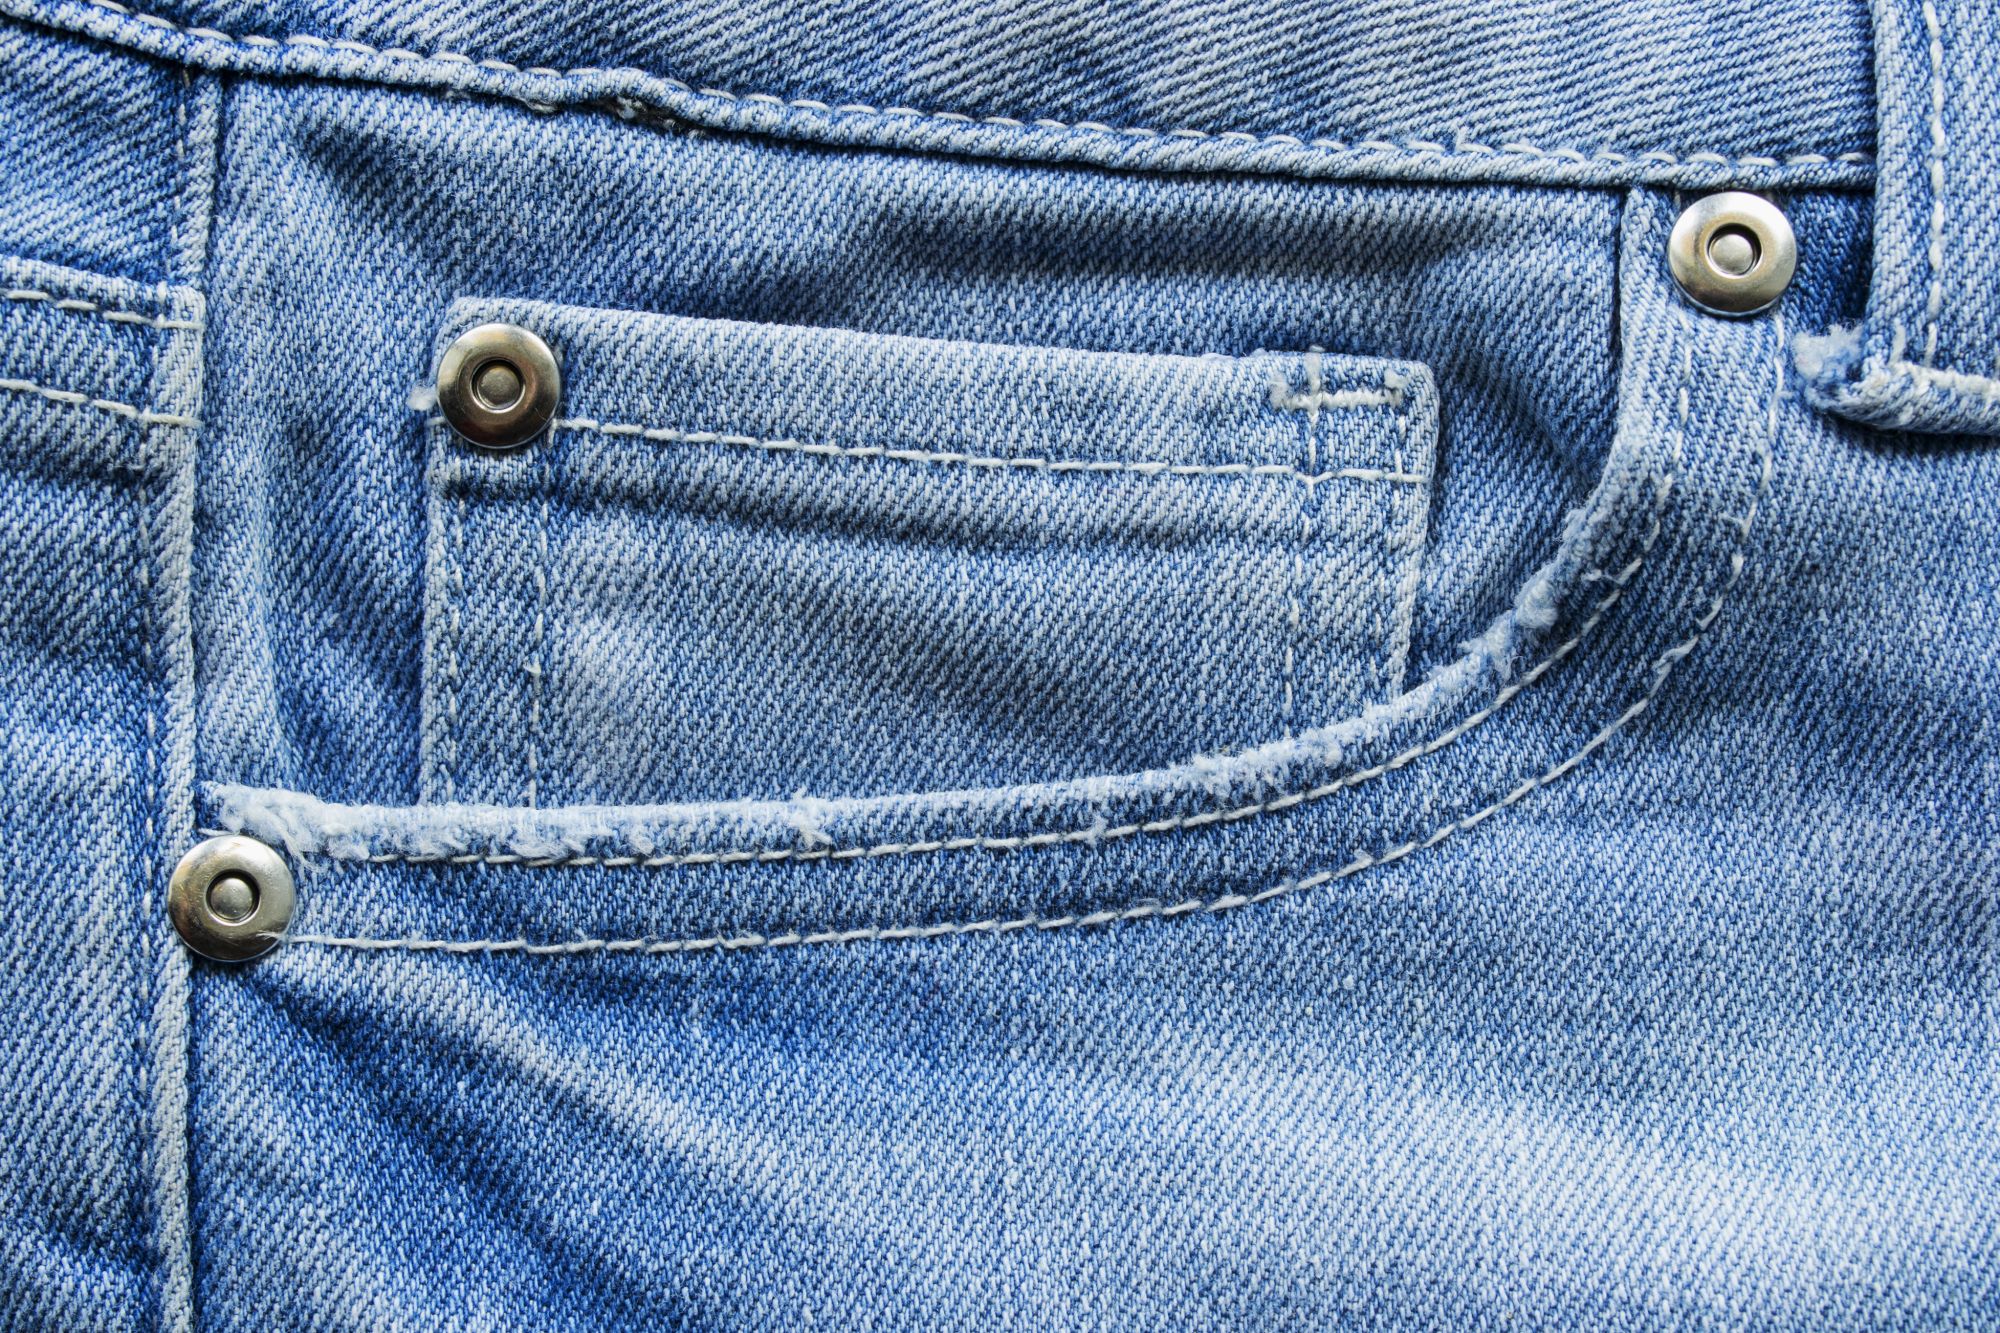 Expert Jean Button Cover Quick Buying Guide